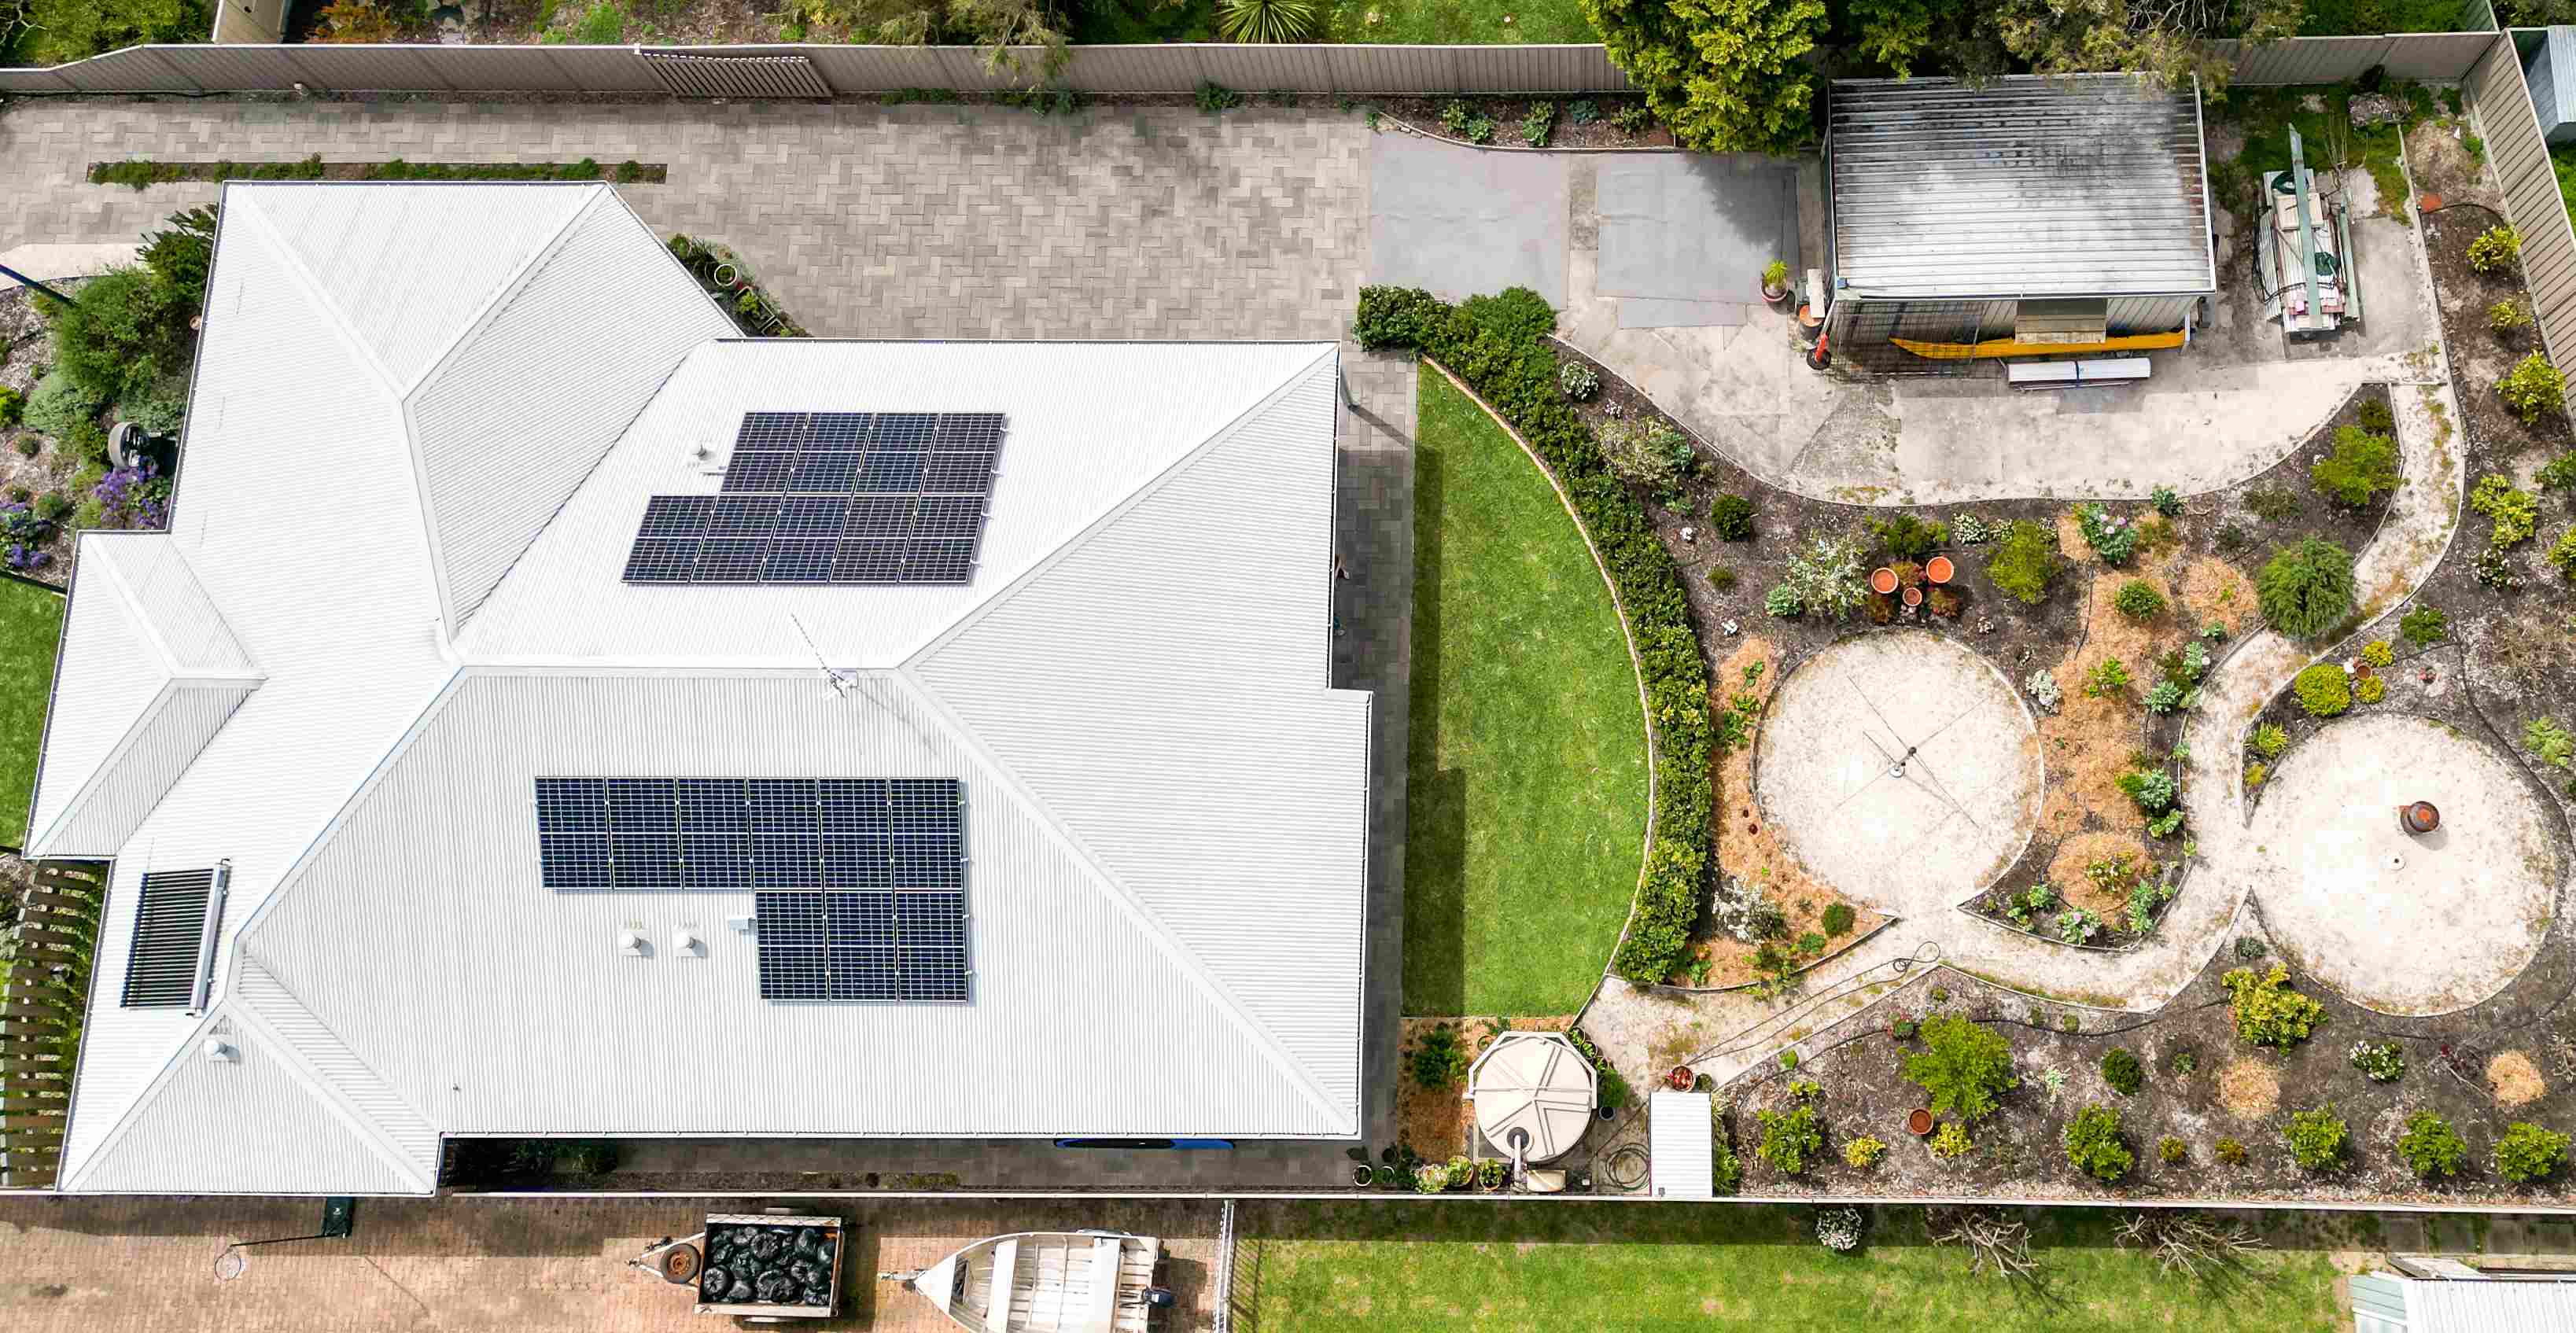 Aerial image of residential home with solar panels on roof